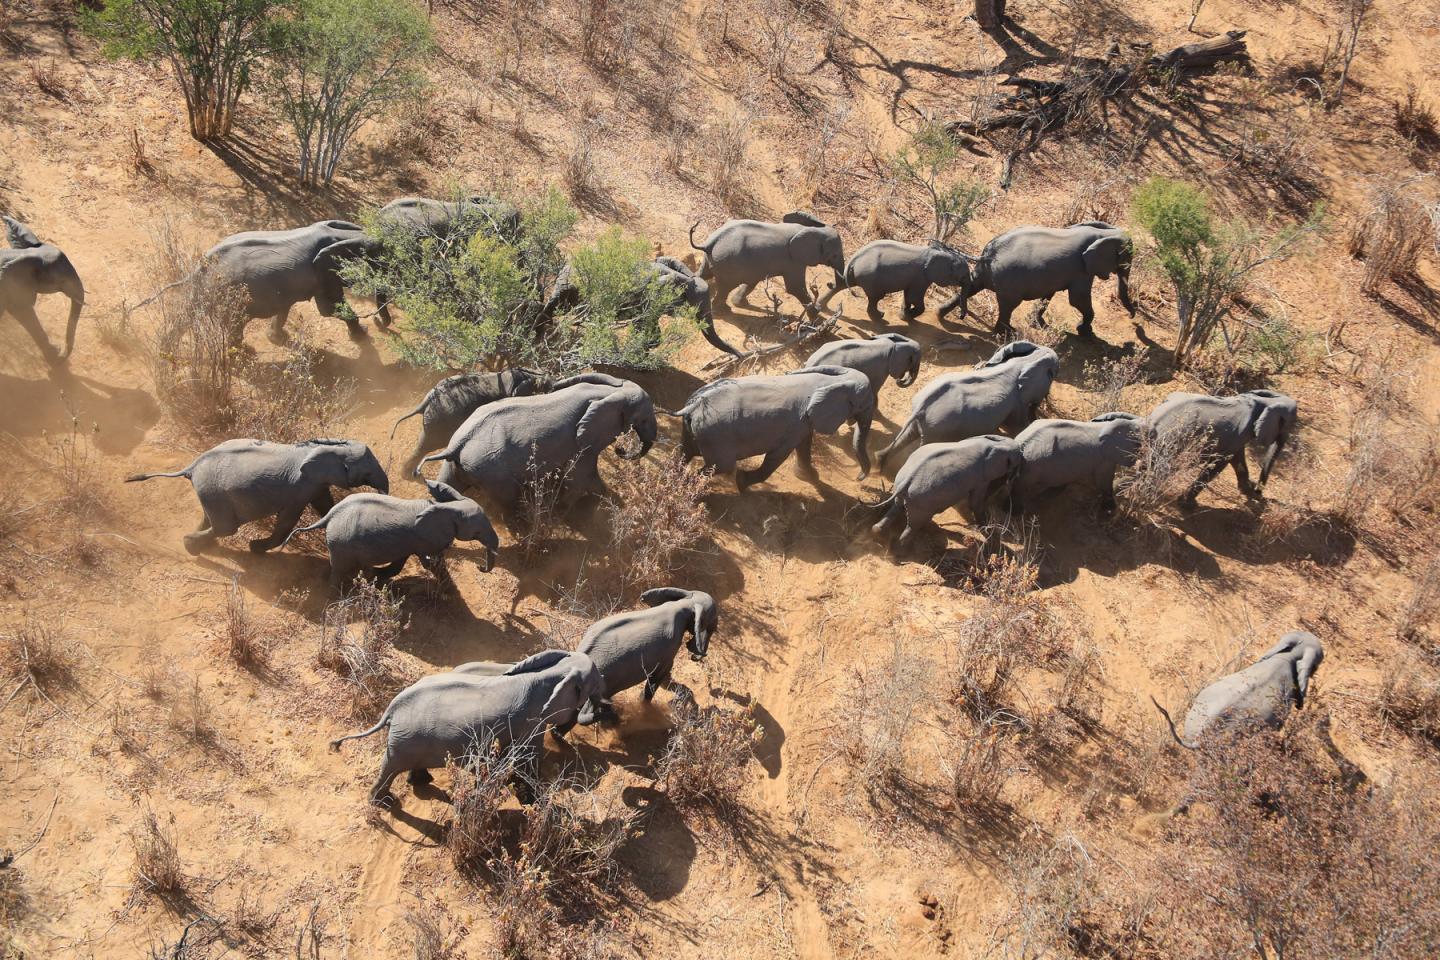 Elephants from the Air